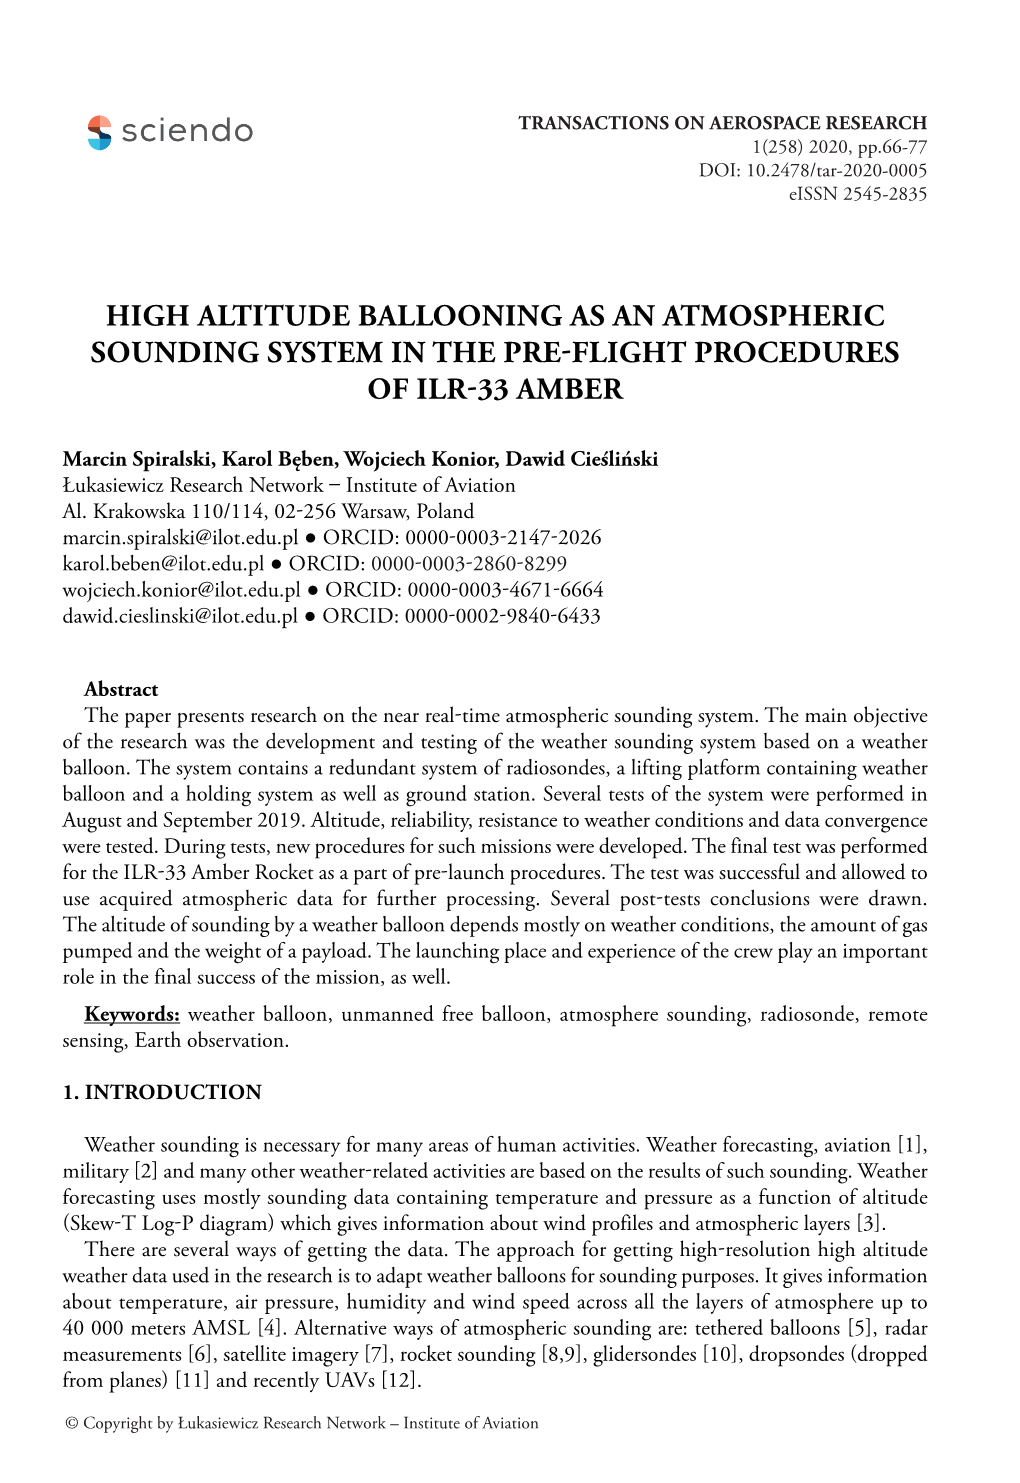 High Altitude Ballooning As an Atmospheric Sounding System